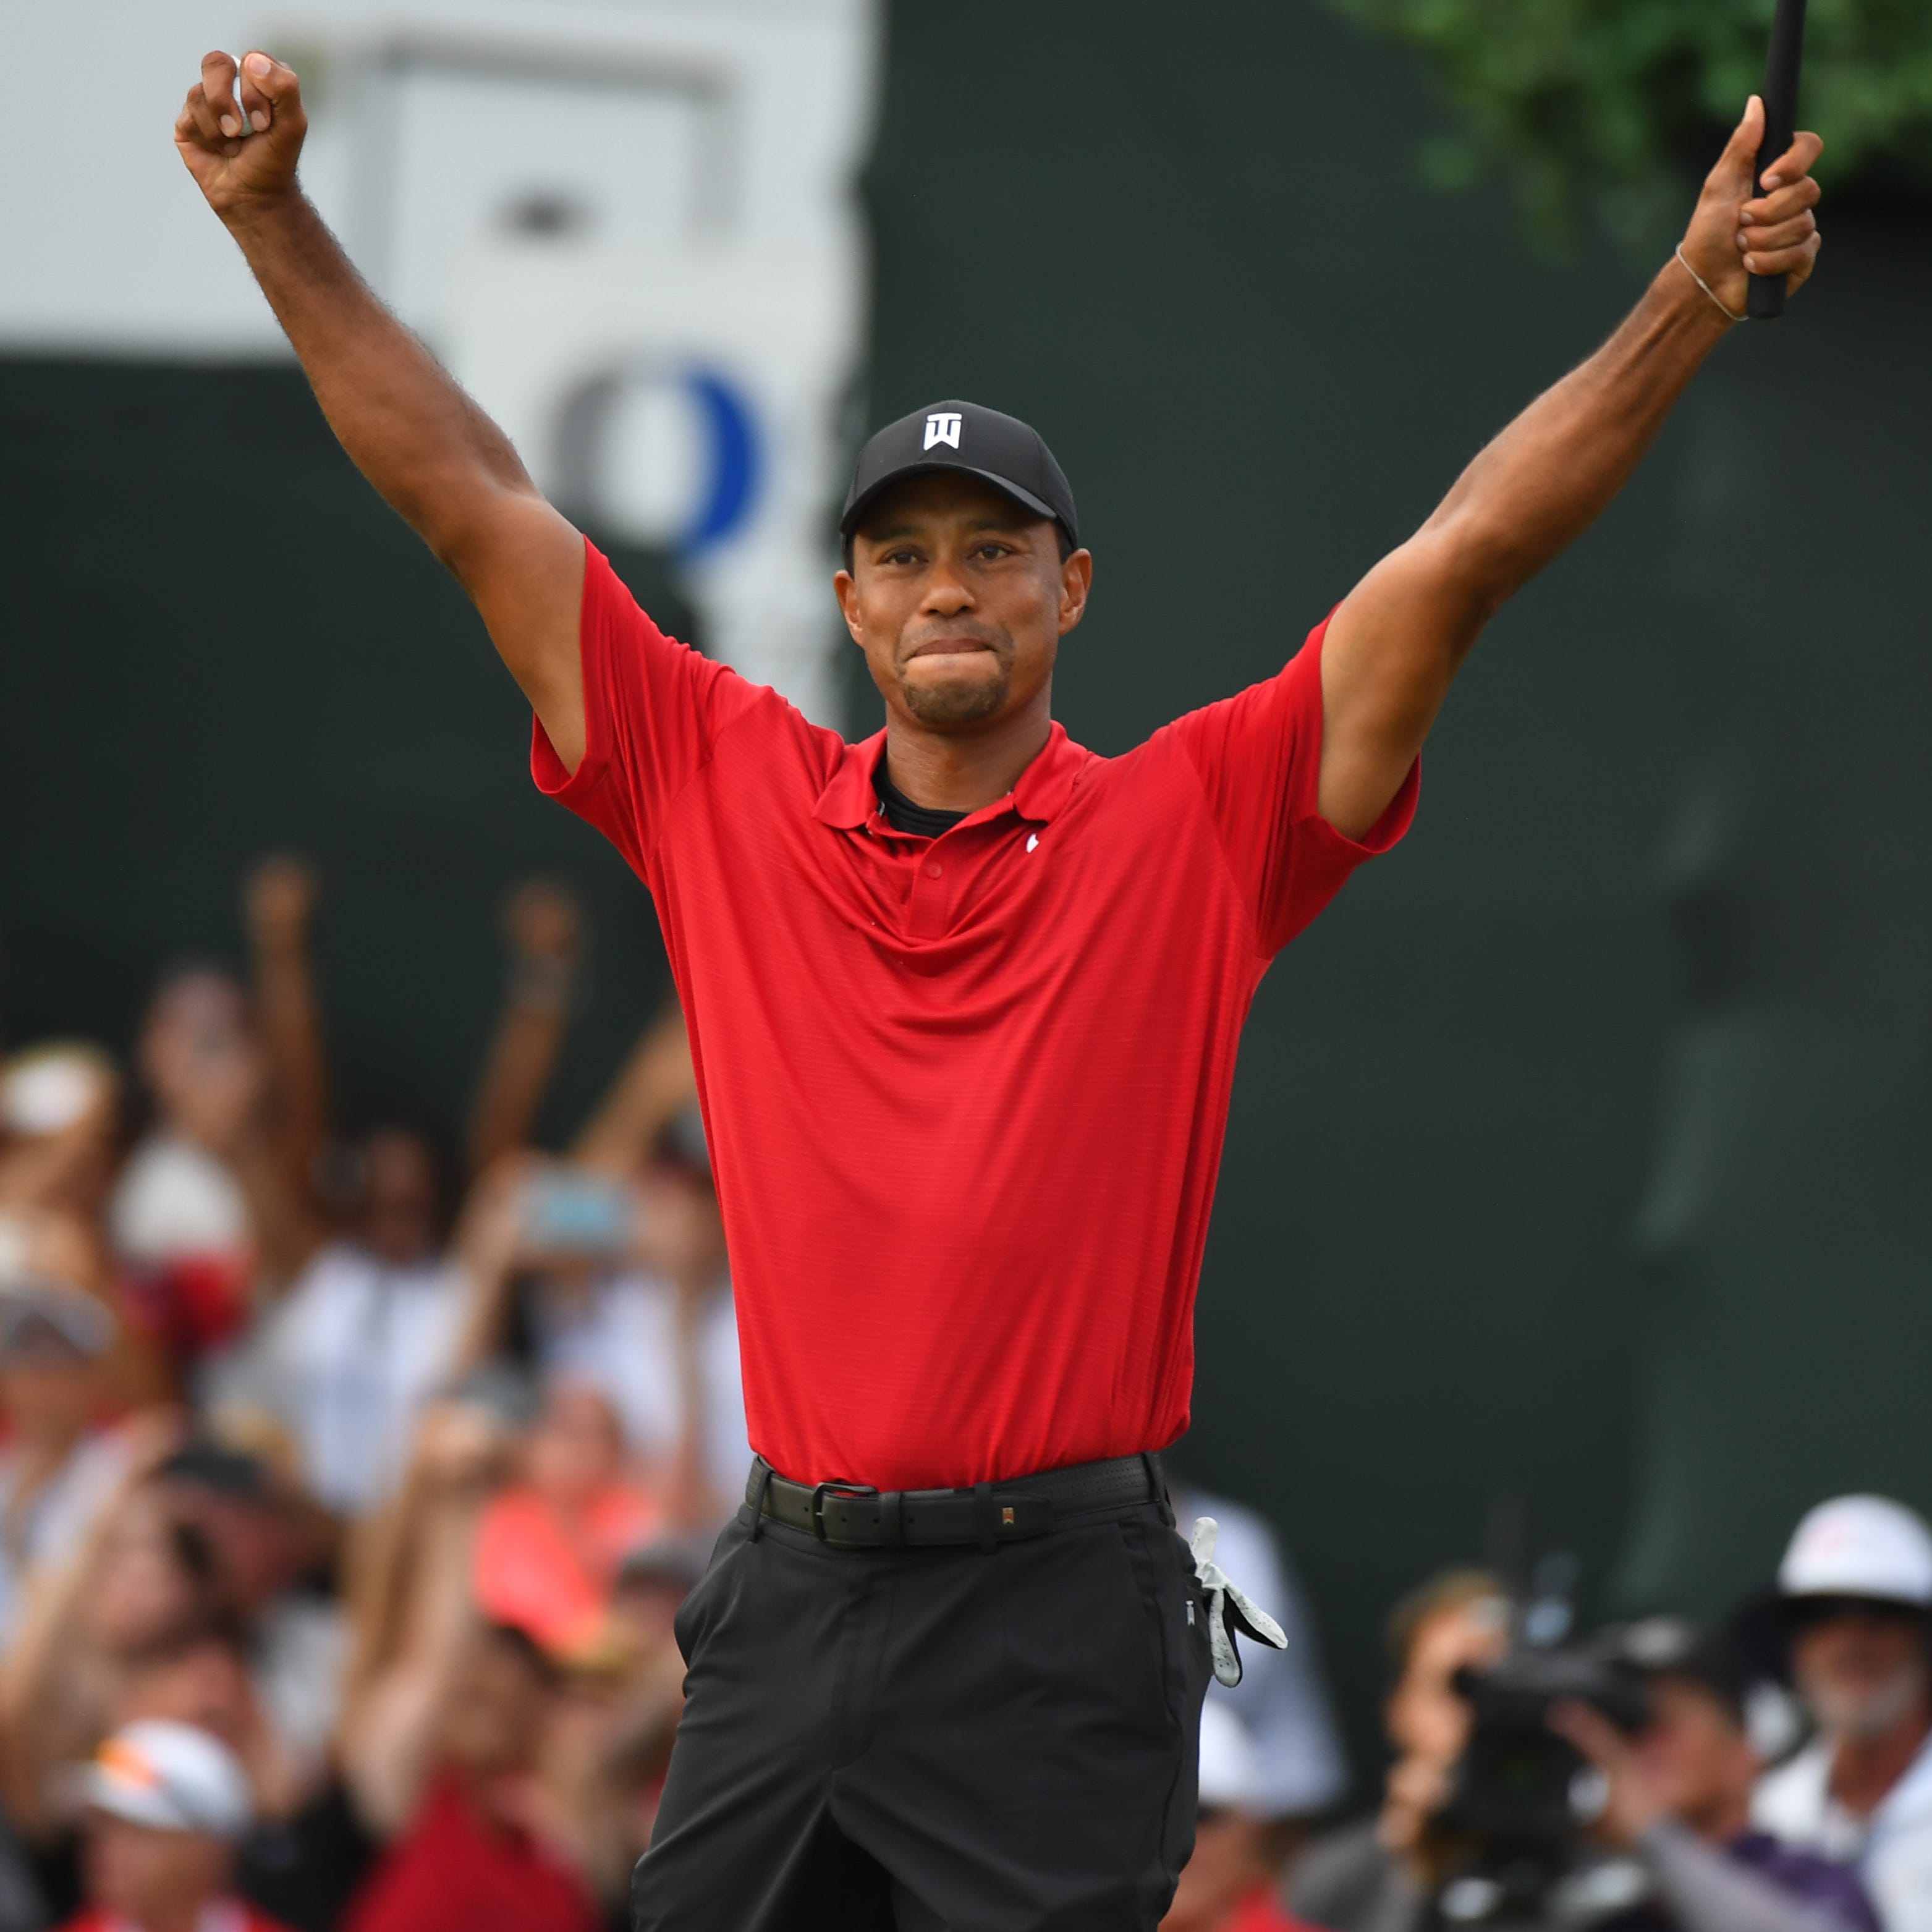 Tiger Woods reacts to winning the Tour Championship golf tournament at East Lake Golf Club.